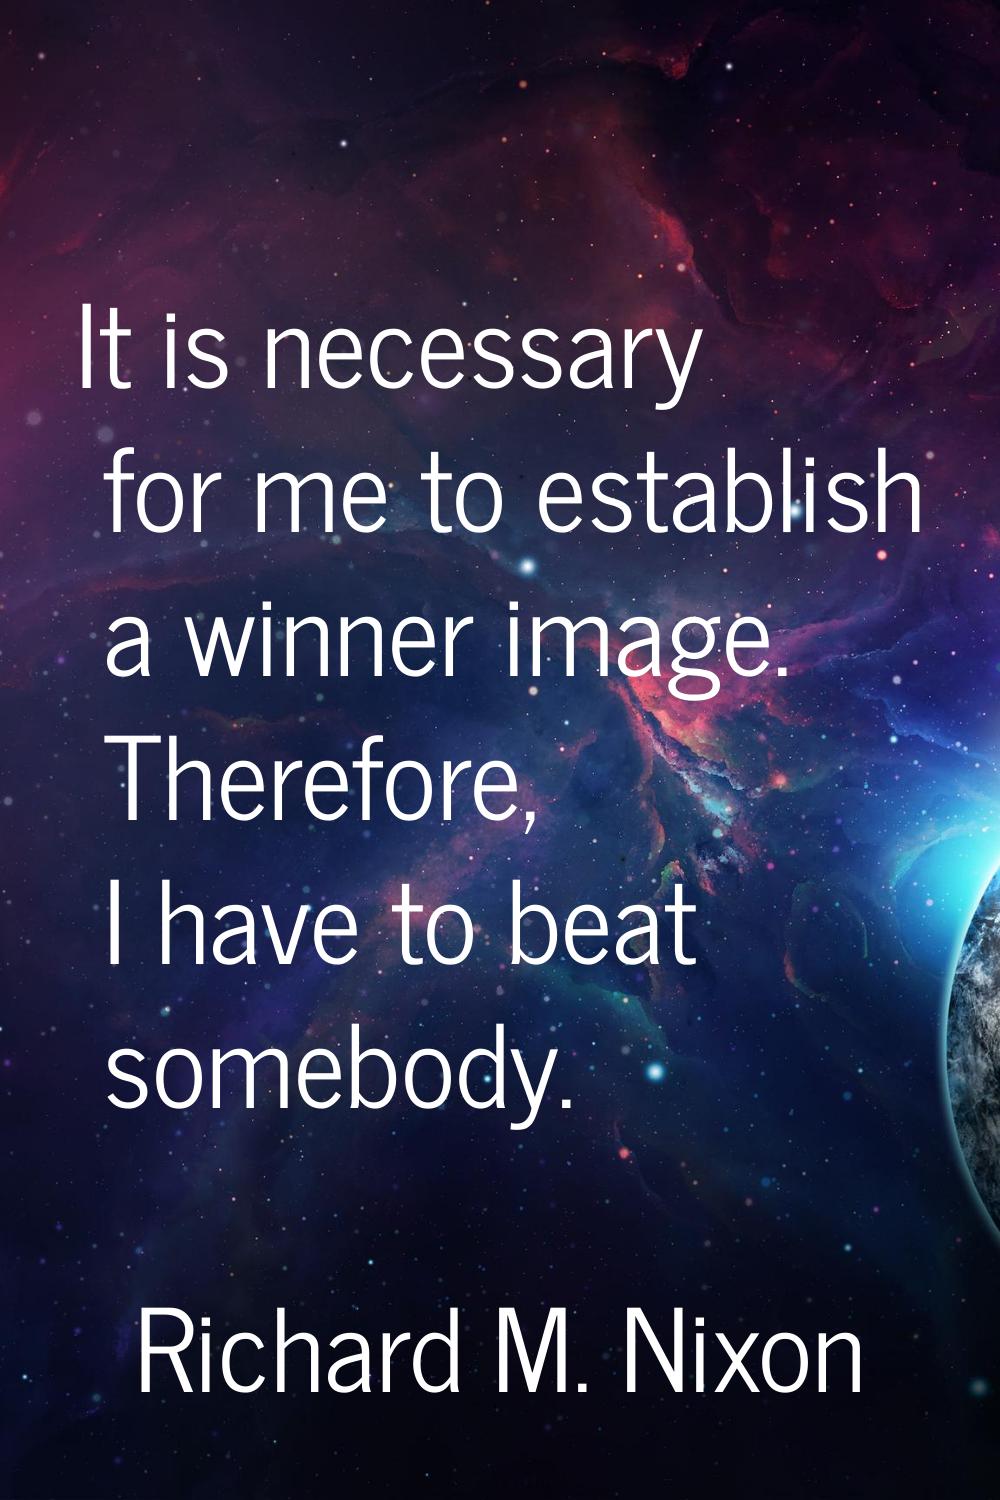 It is necessary for me to establish a winner image. Therefore, I have to beat somebody.